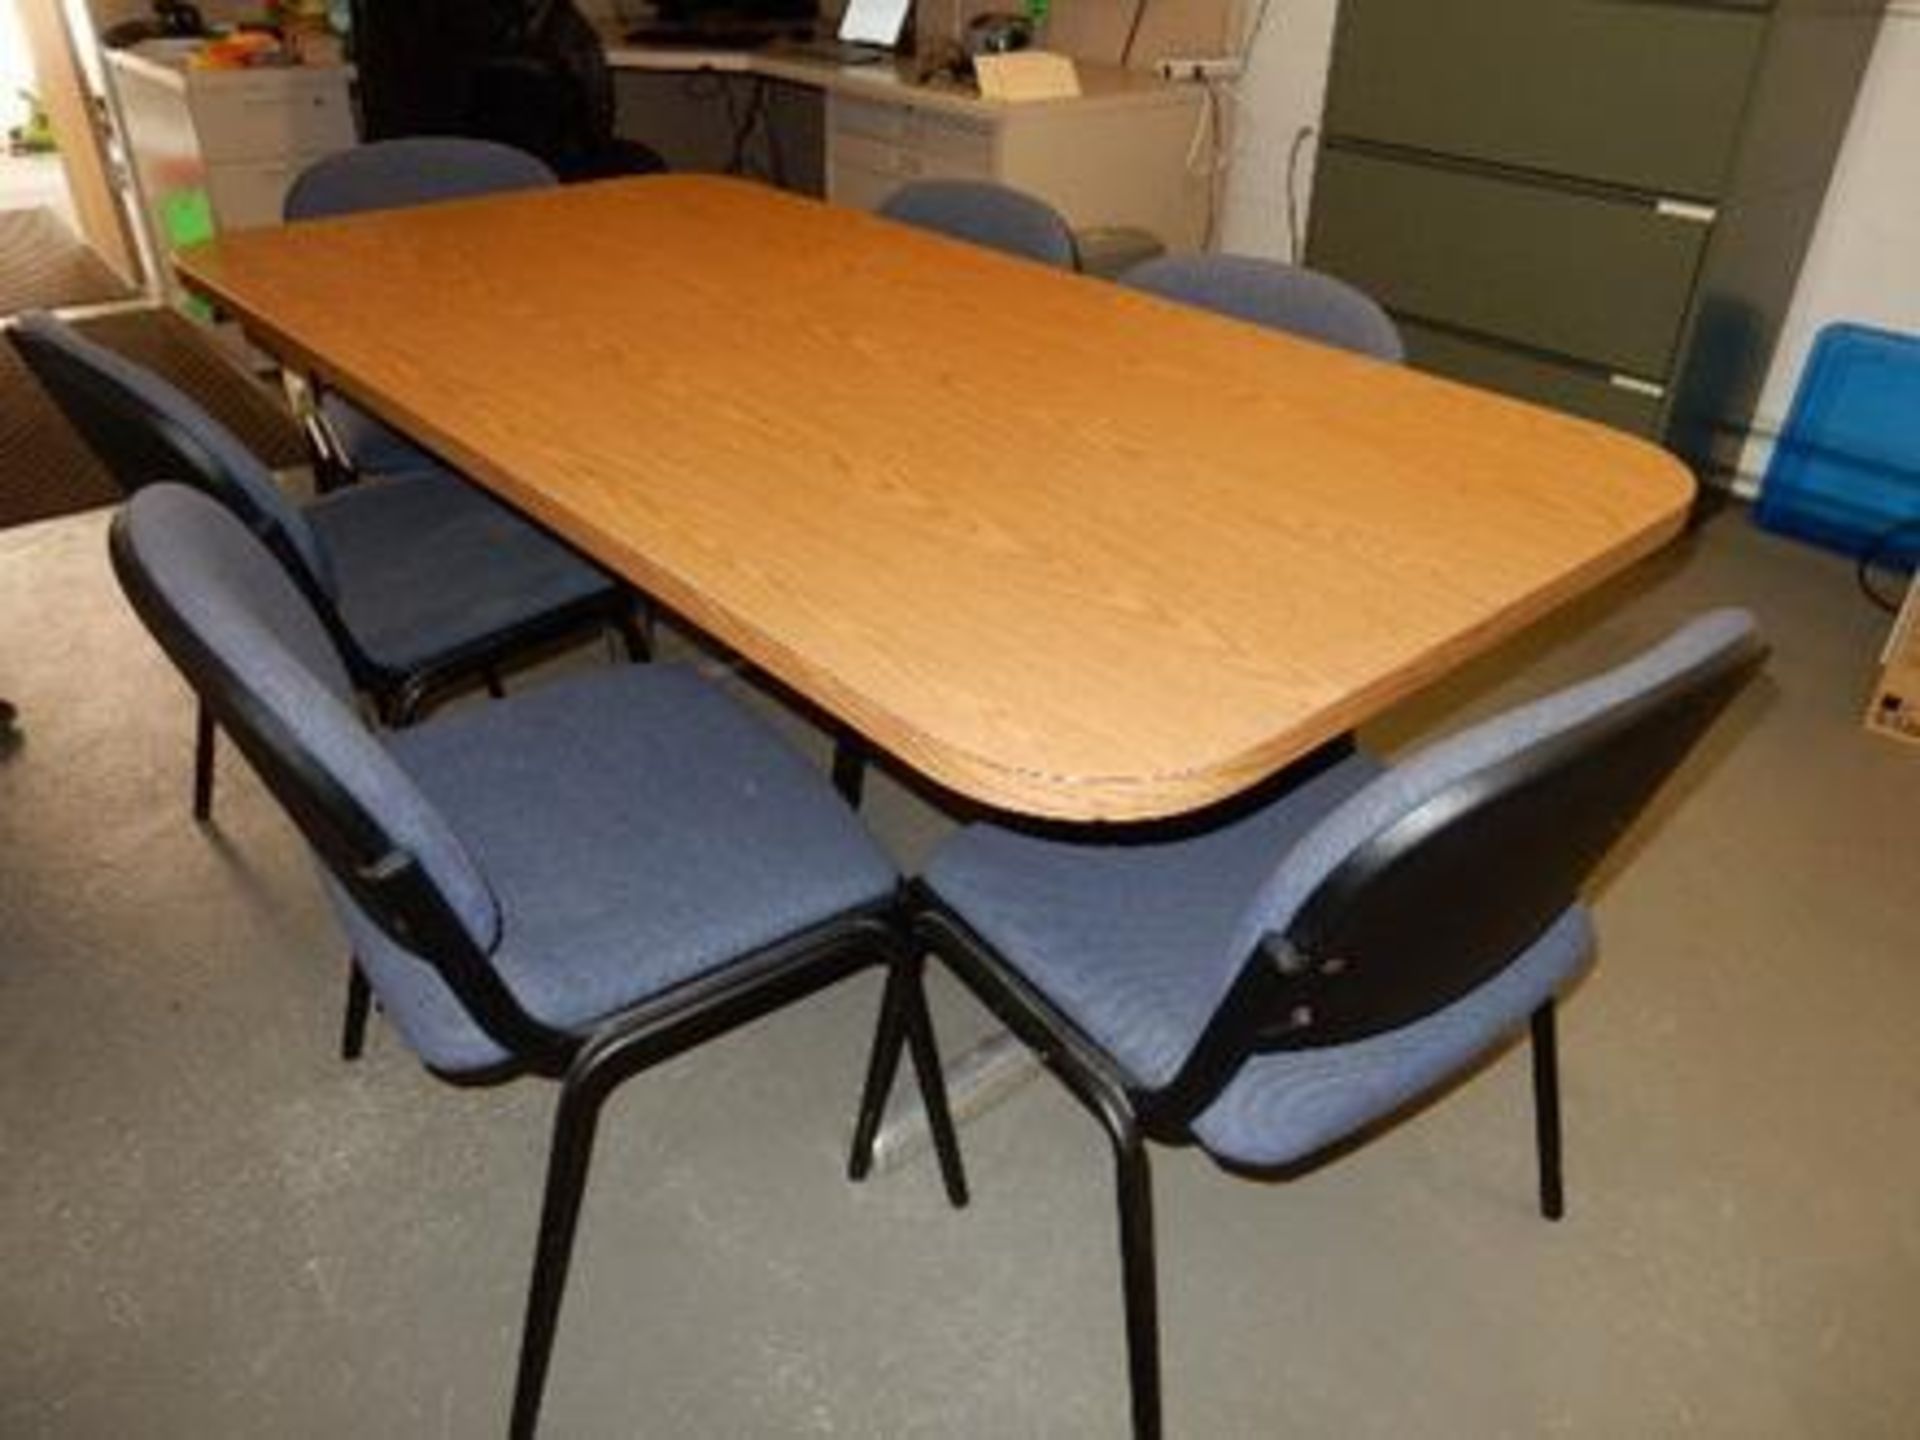 Wood Office Table with 6 Chairs, Dimension: 36: x 72"x 29" . - Image 4 of 4